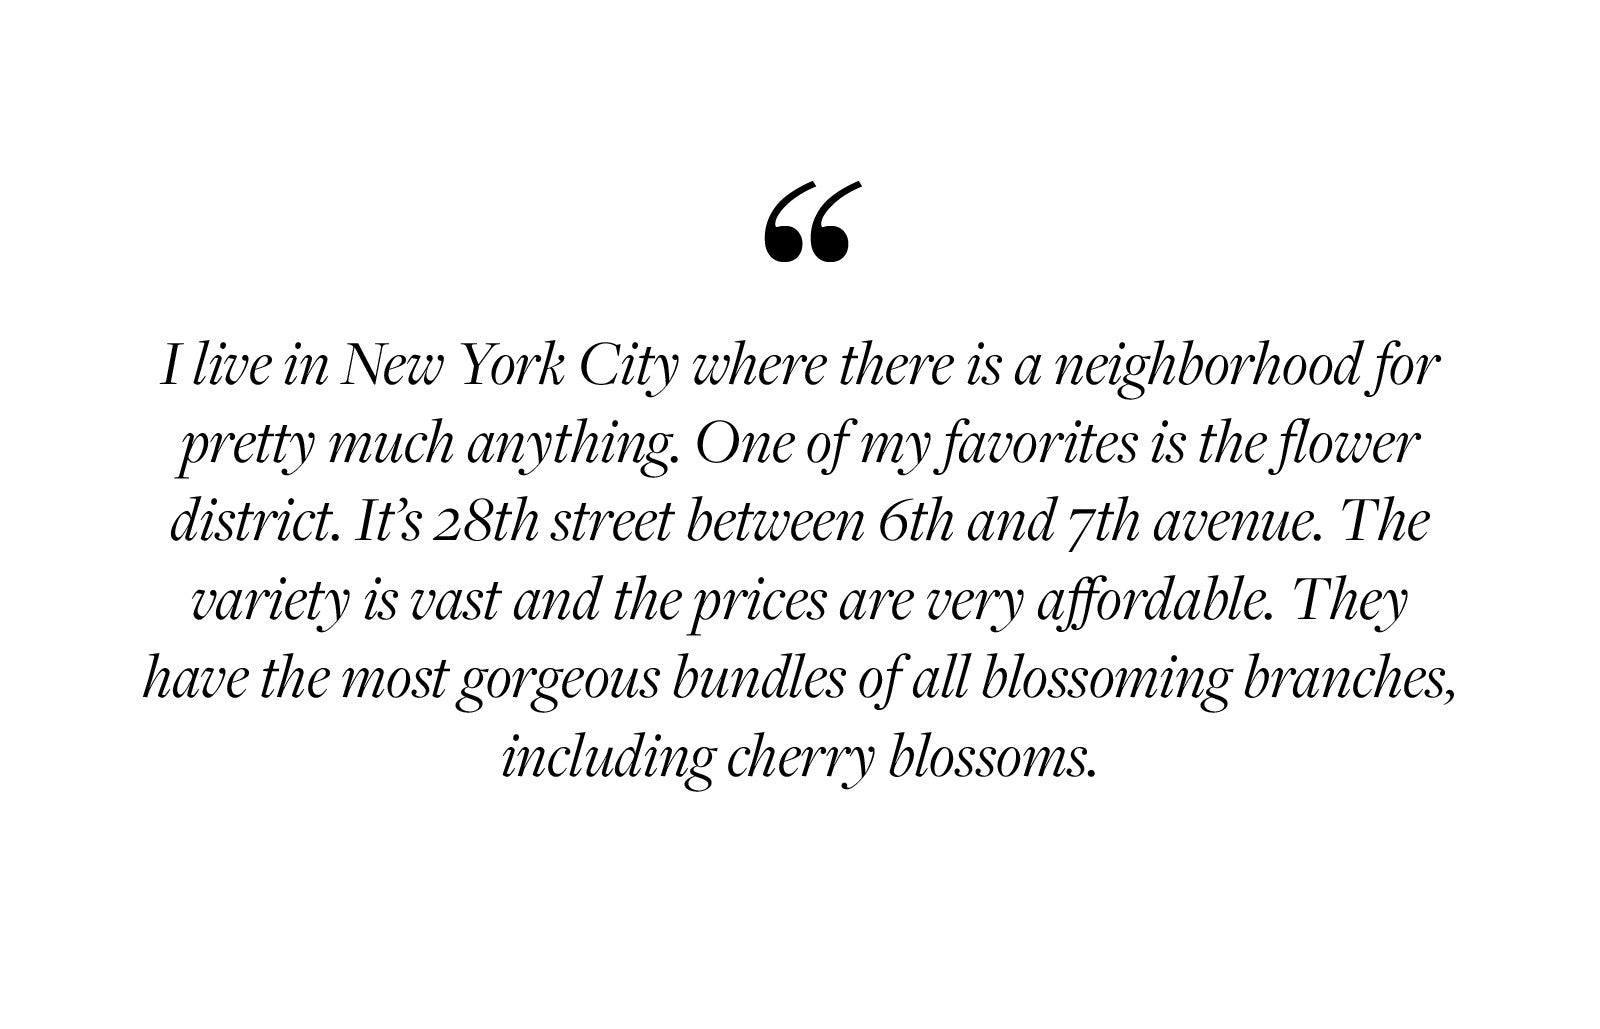 I live in New York City where there is a neighborhood for pretty much anything. One of my favorites is the flower district. It’s 28th street between 6th and 7th avenue. The variety is vast and the prices are very affordable. They have the most gorgeous bundles of all blossoming branches, including cherry blossoms.  